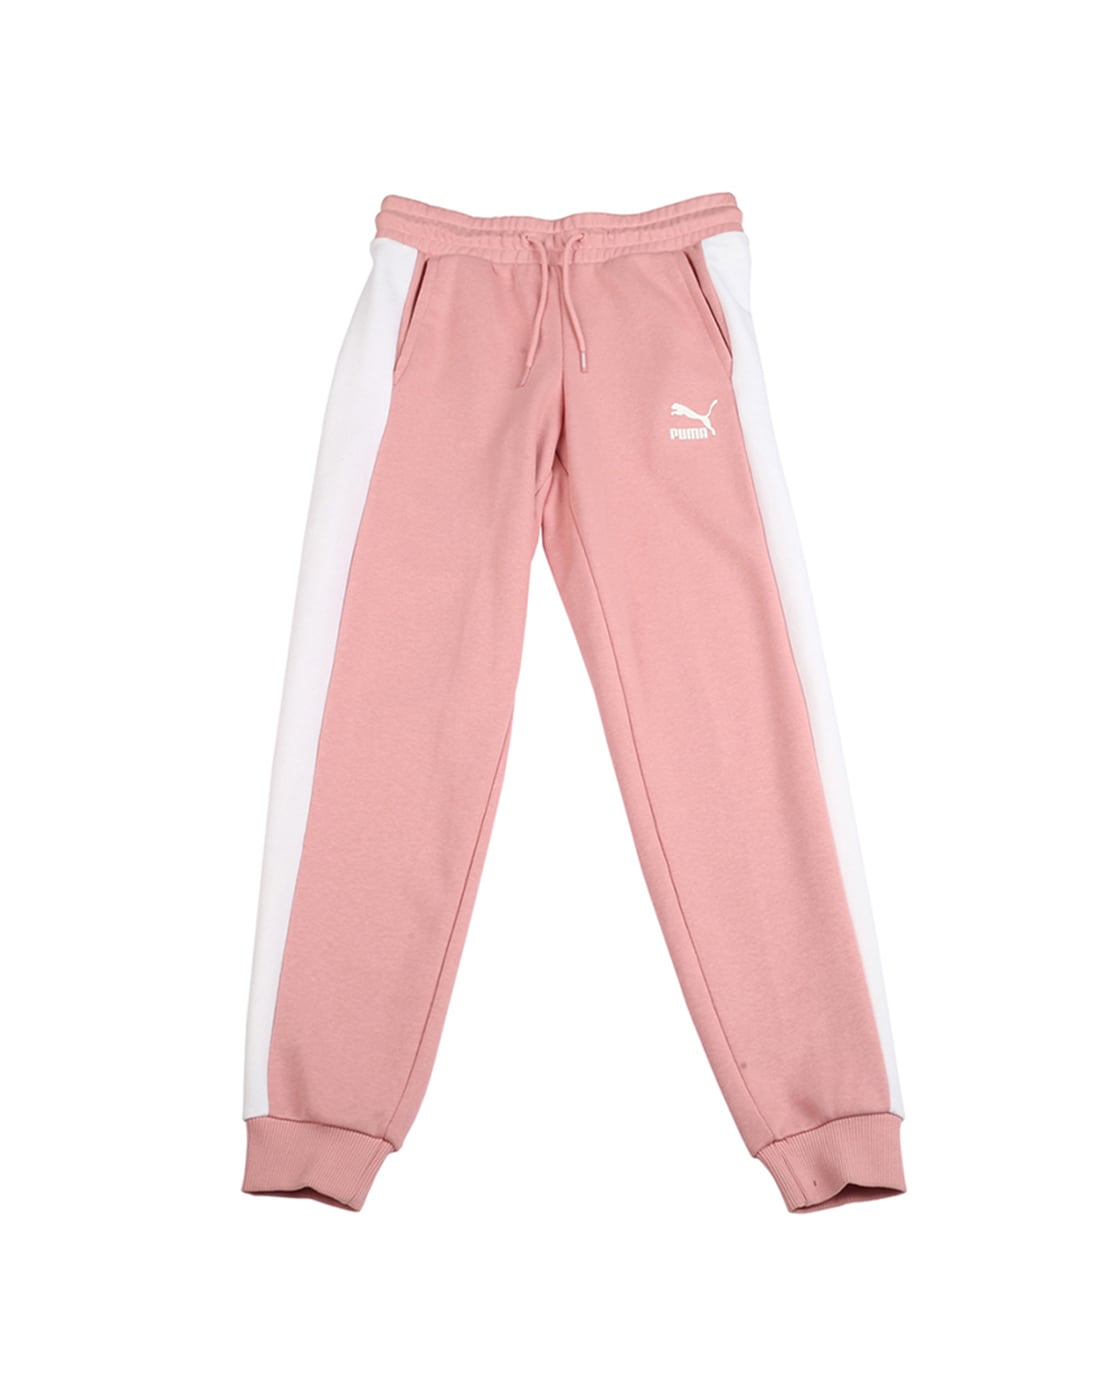 Buy Pink Track Pants for Girls by Puma 